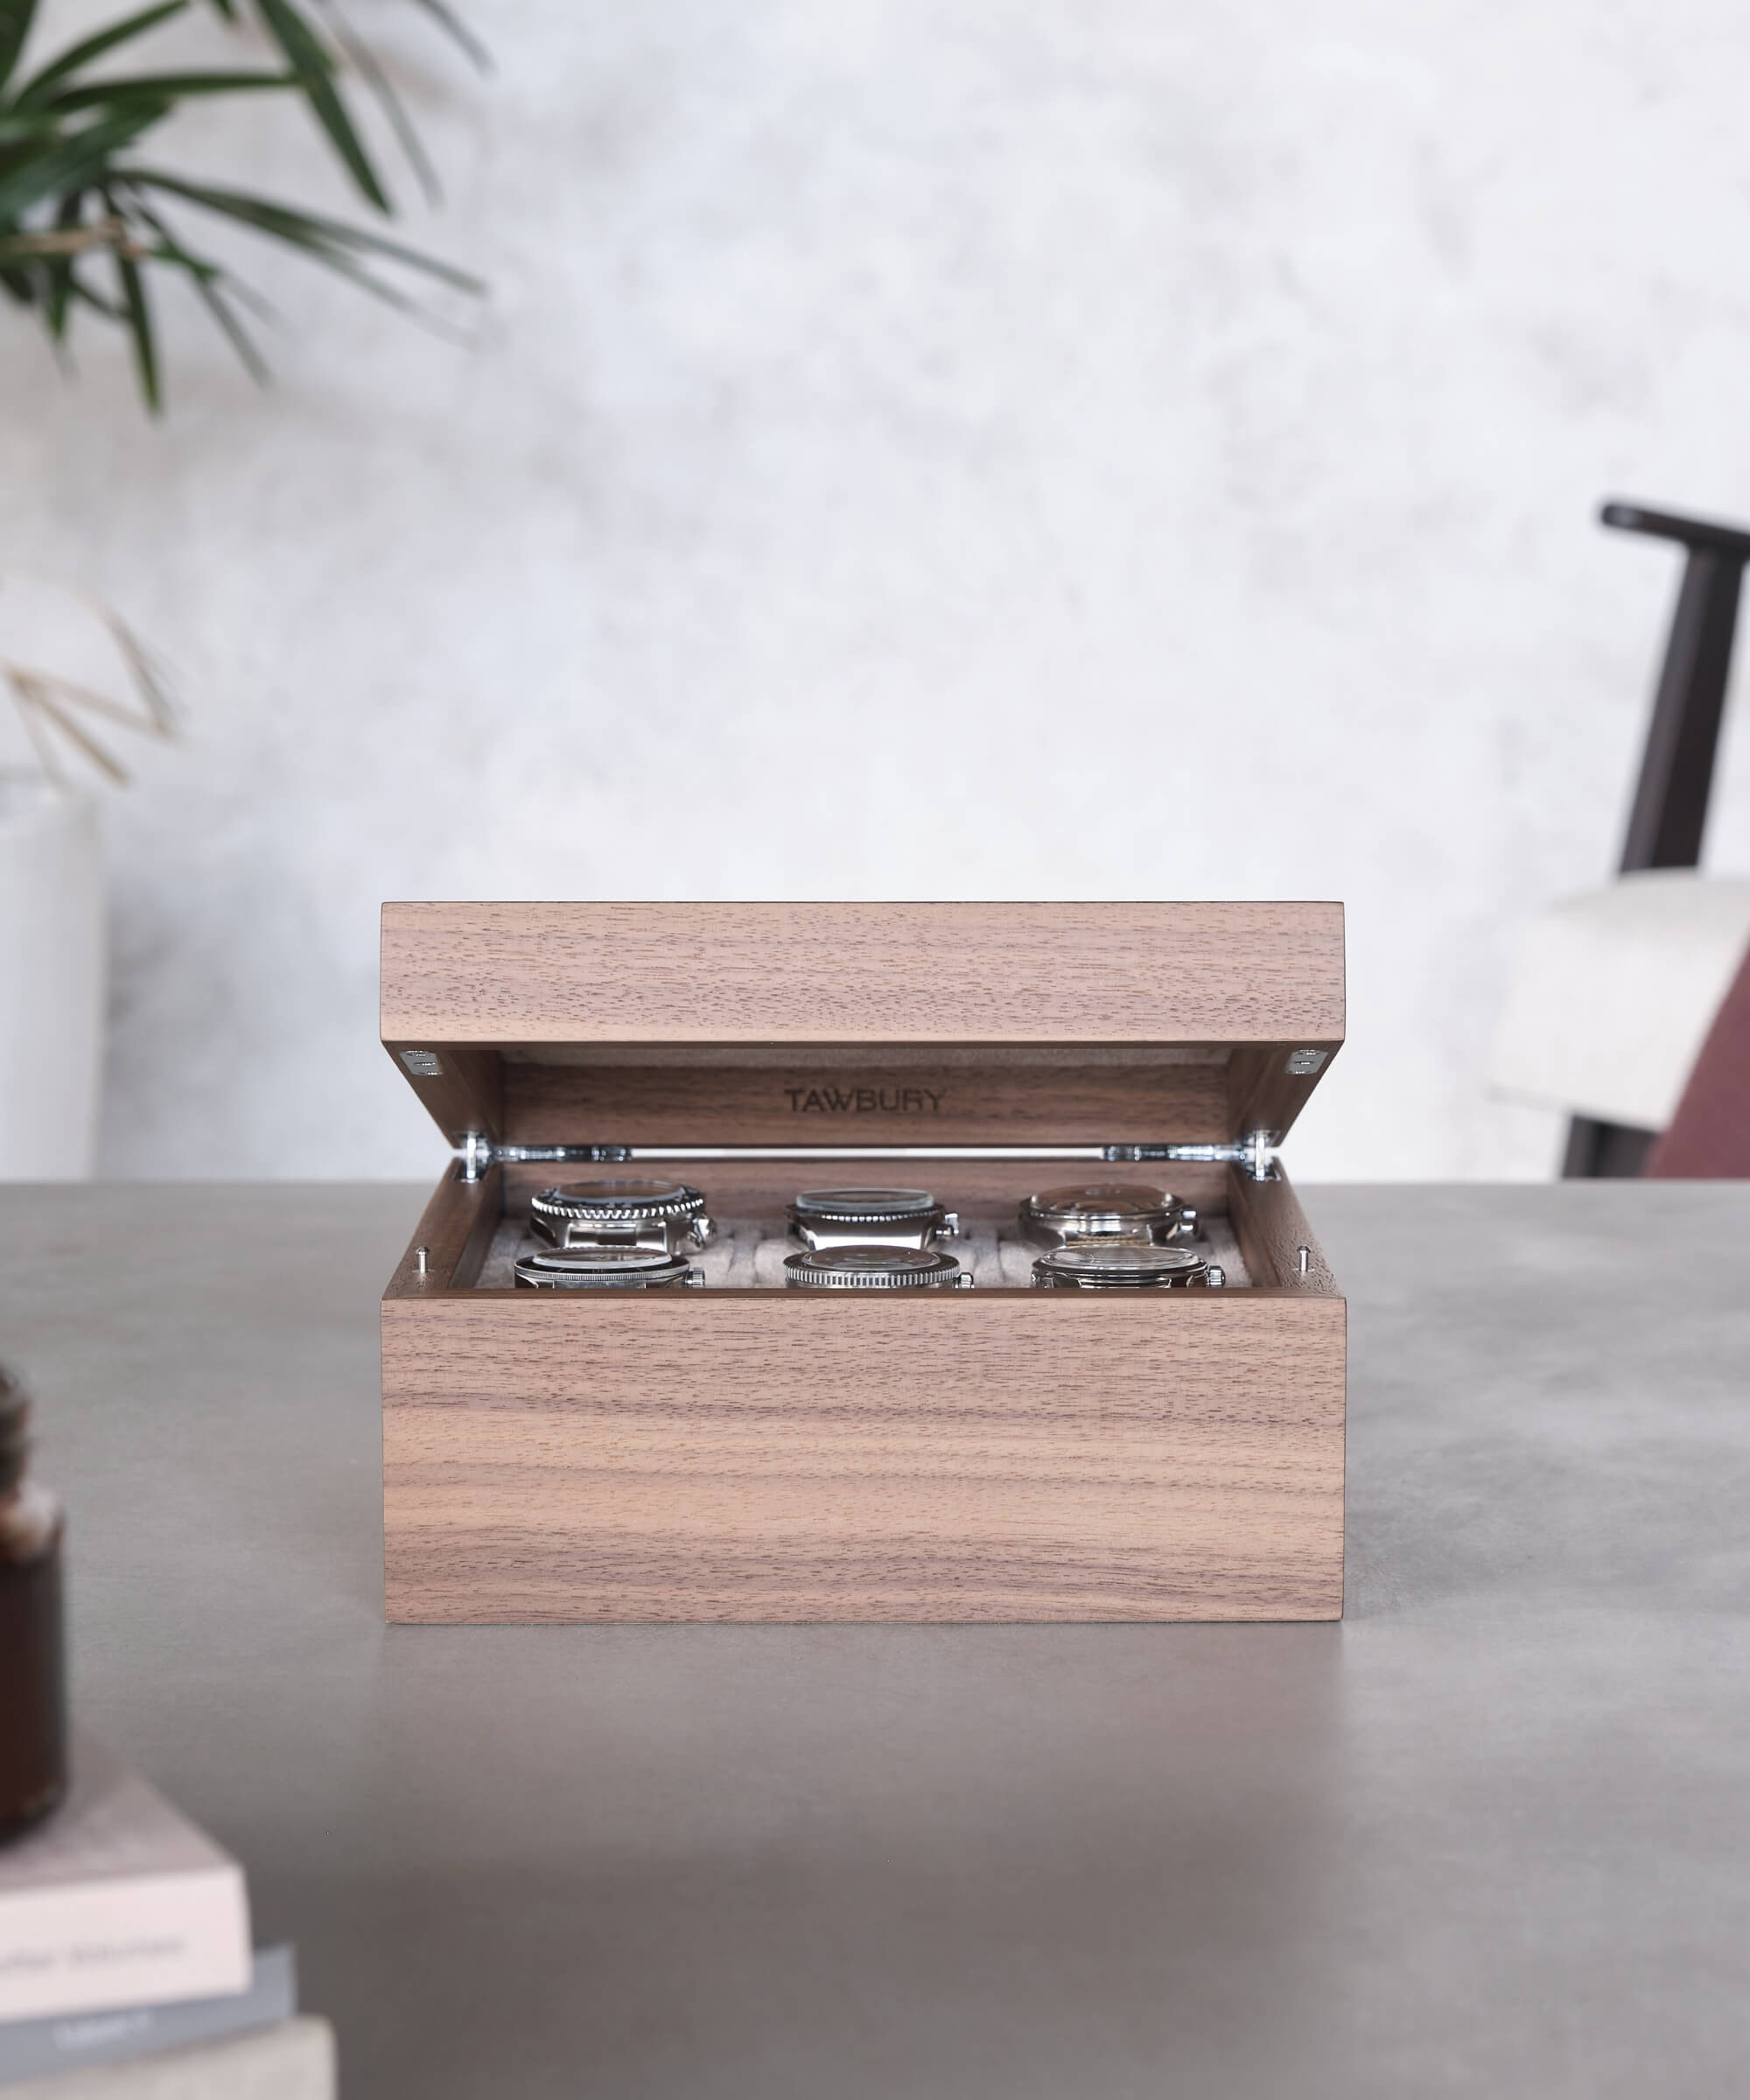 A TAWBURY Grove 6 Slot Watch Box with Solid Lid - Walnut with timepieces in a wooden box.